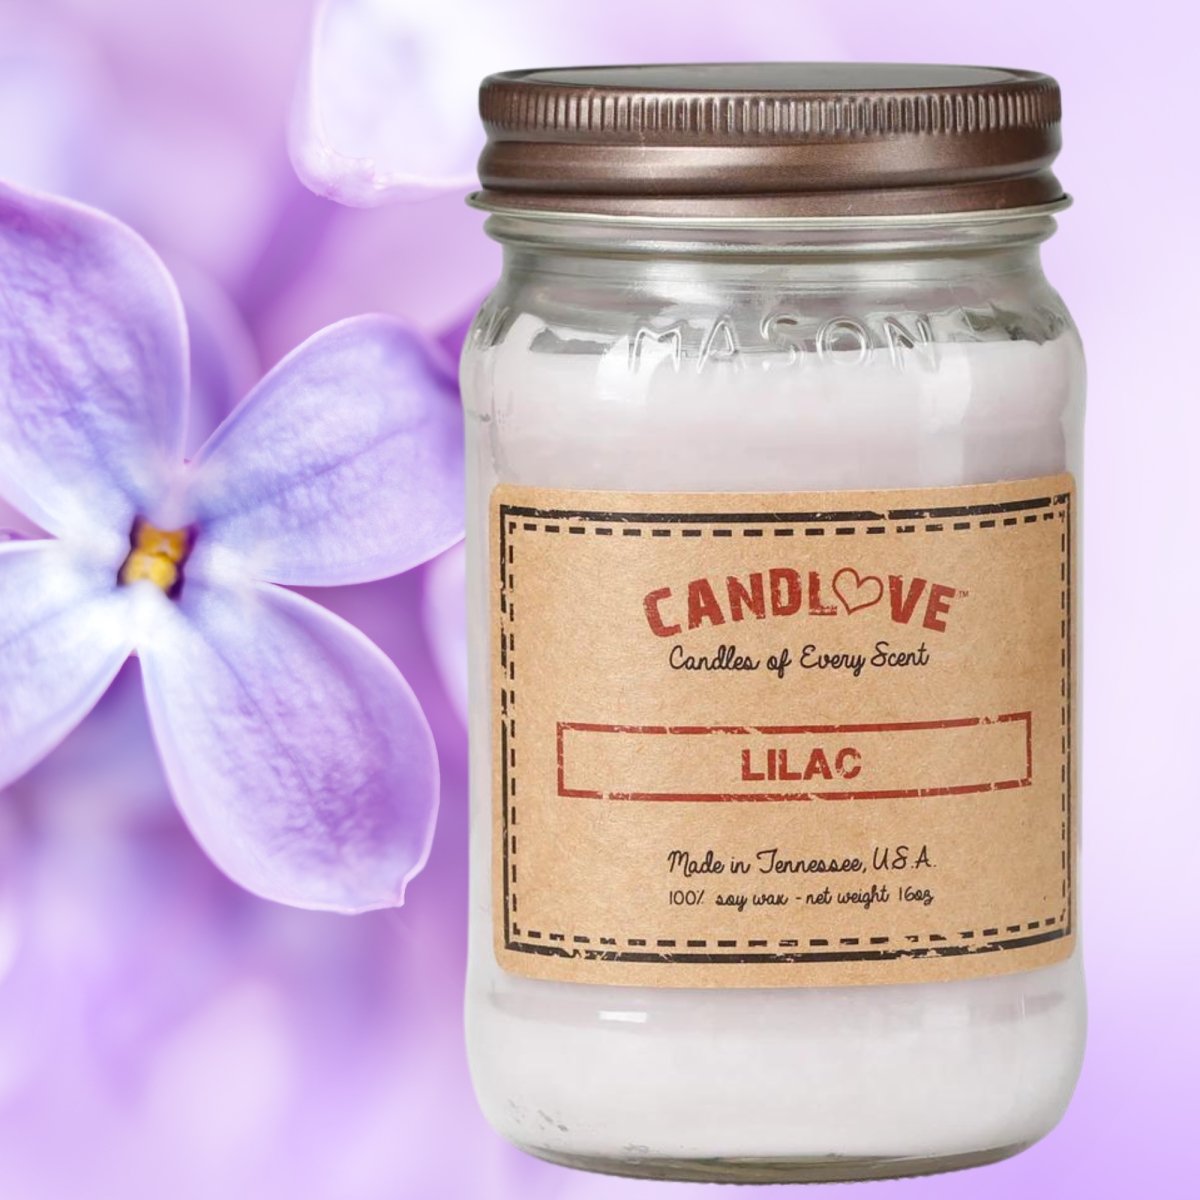 Picture of PPI SUPPLIES Lilac-C Candlove Lilac Scented Candle - Non-Toxic 100% Soy Candle - Handmade & Hand Poured Long Burning Candle - Highly Scented All Natural Clean Burning Candle (16 OZ Mason Jar) Made in The USA